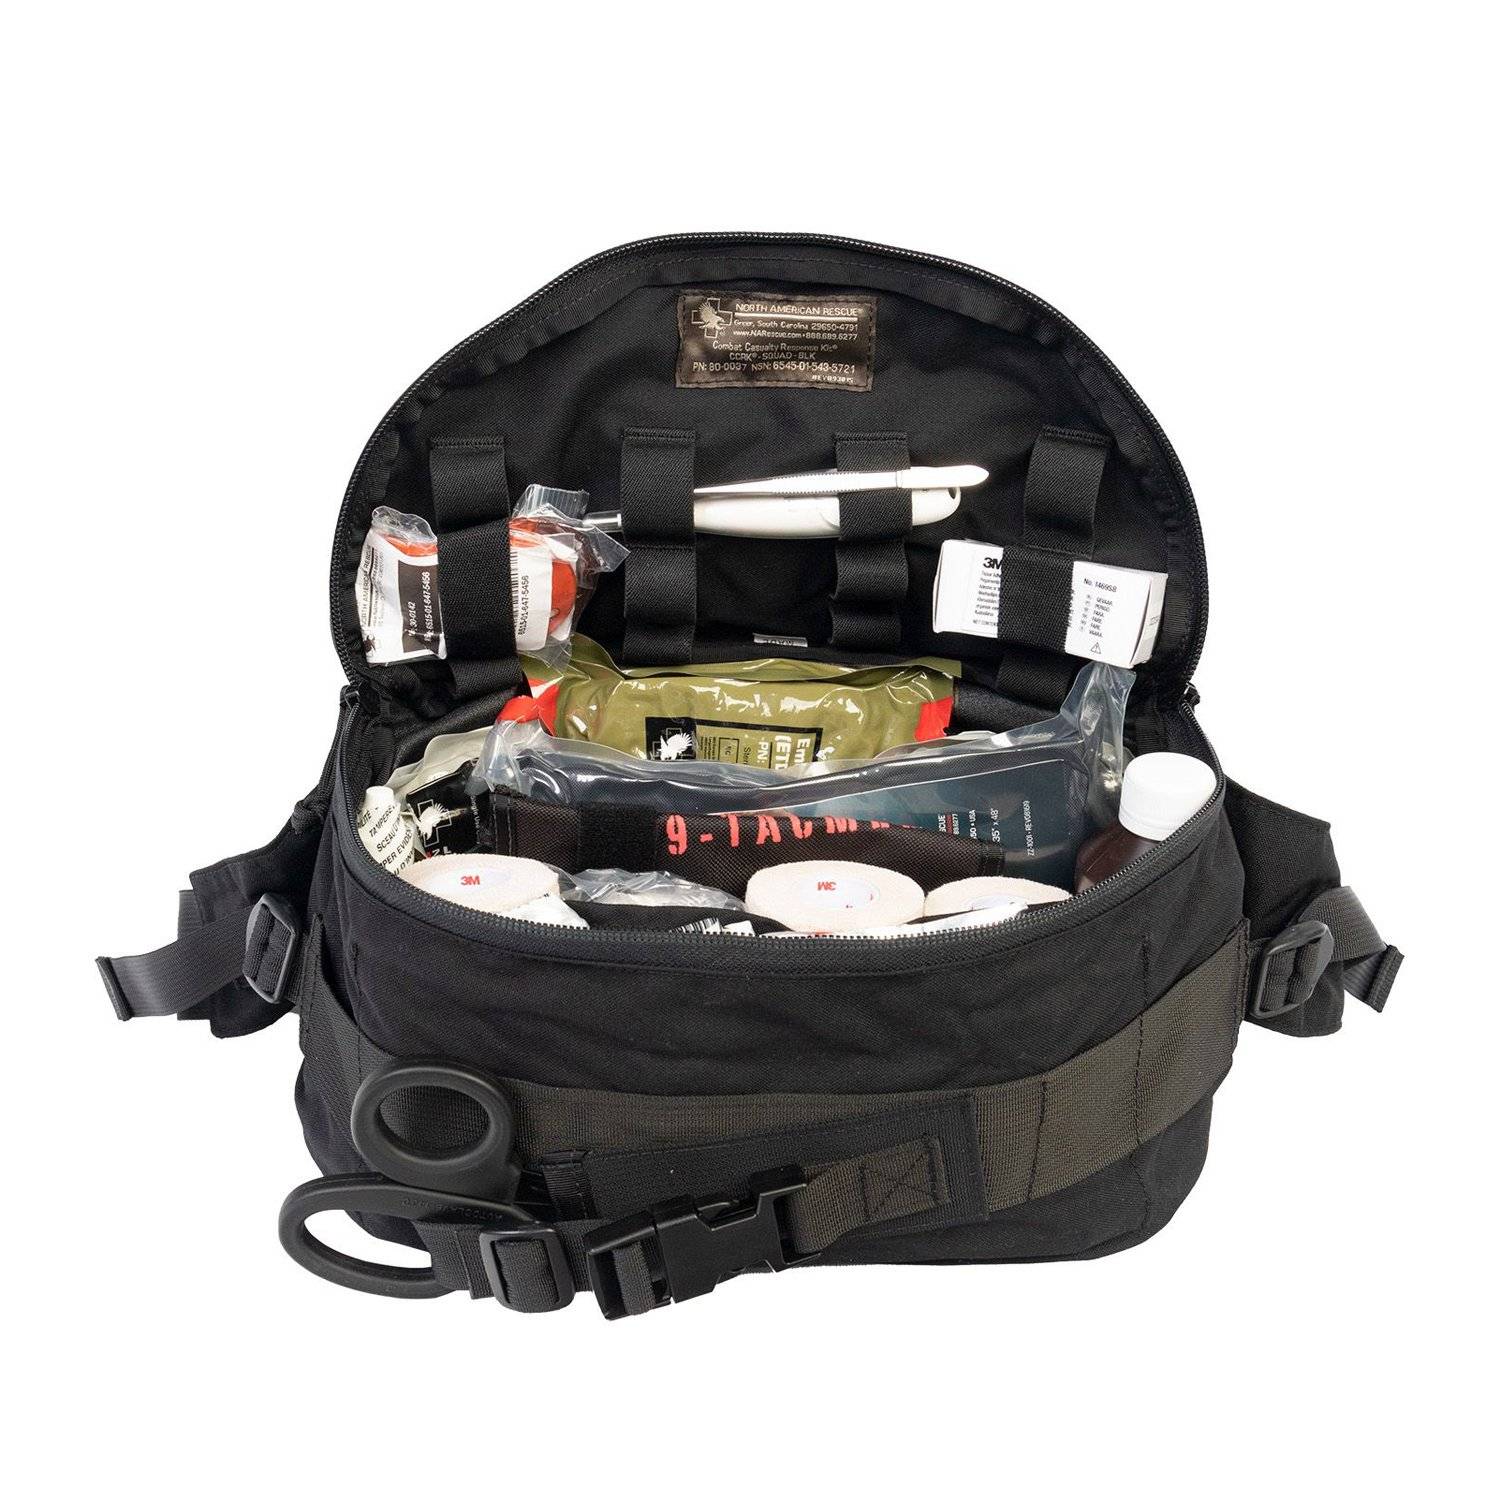 North American Rescue K9 Tactical Field Kit